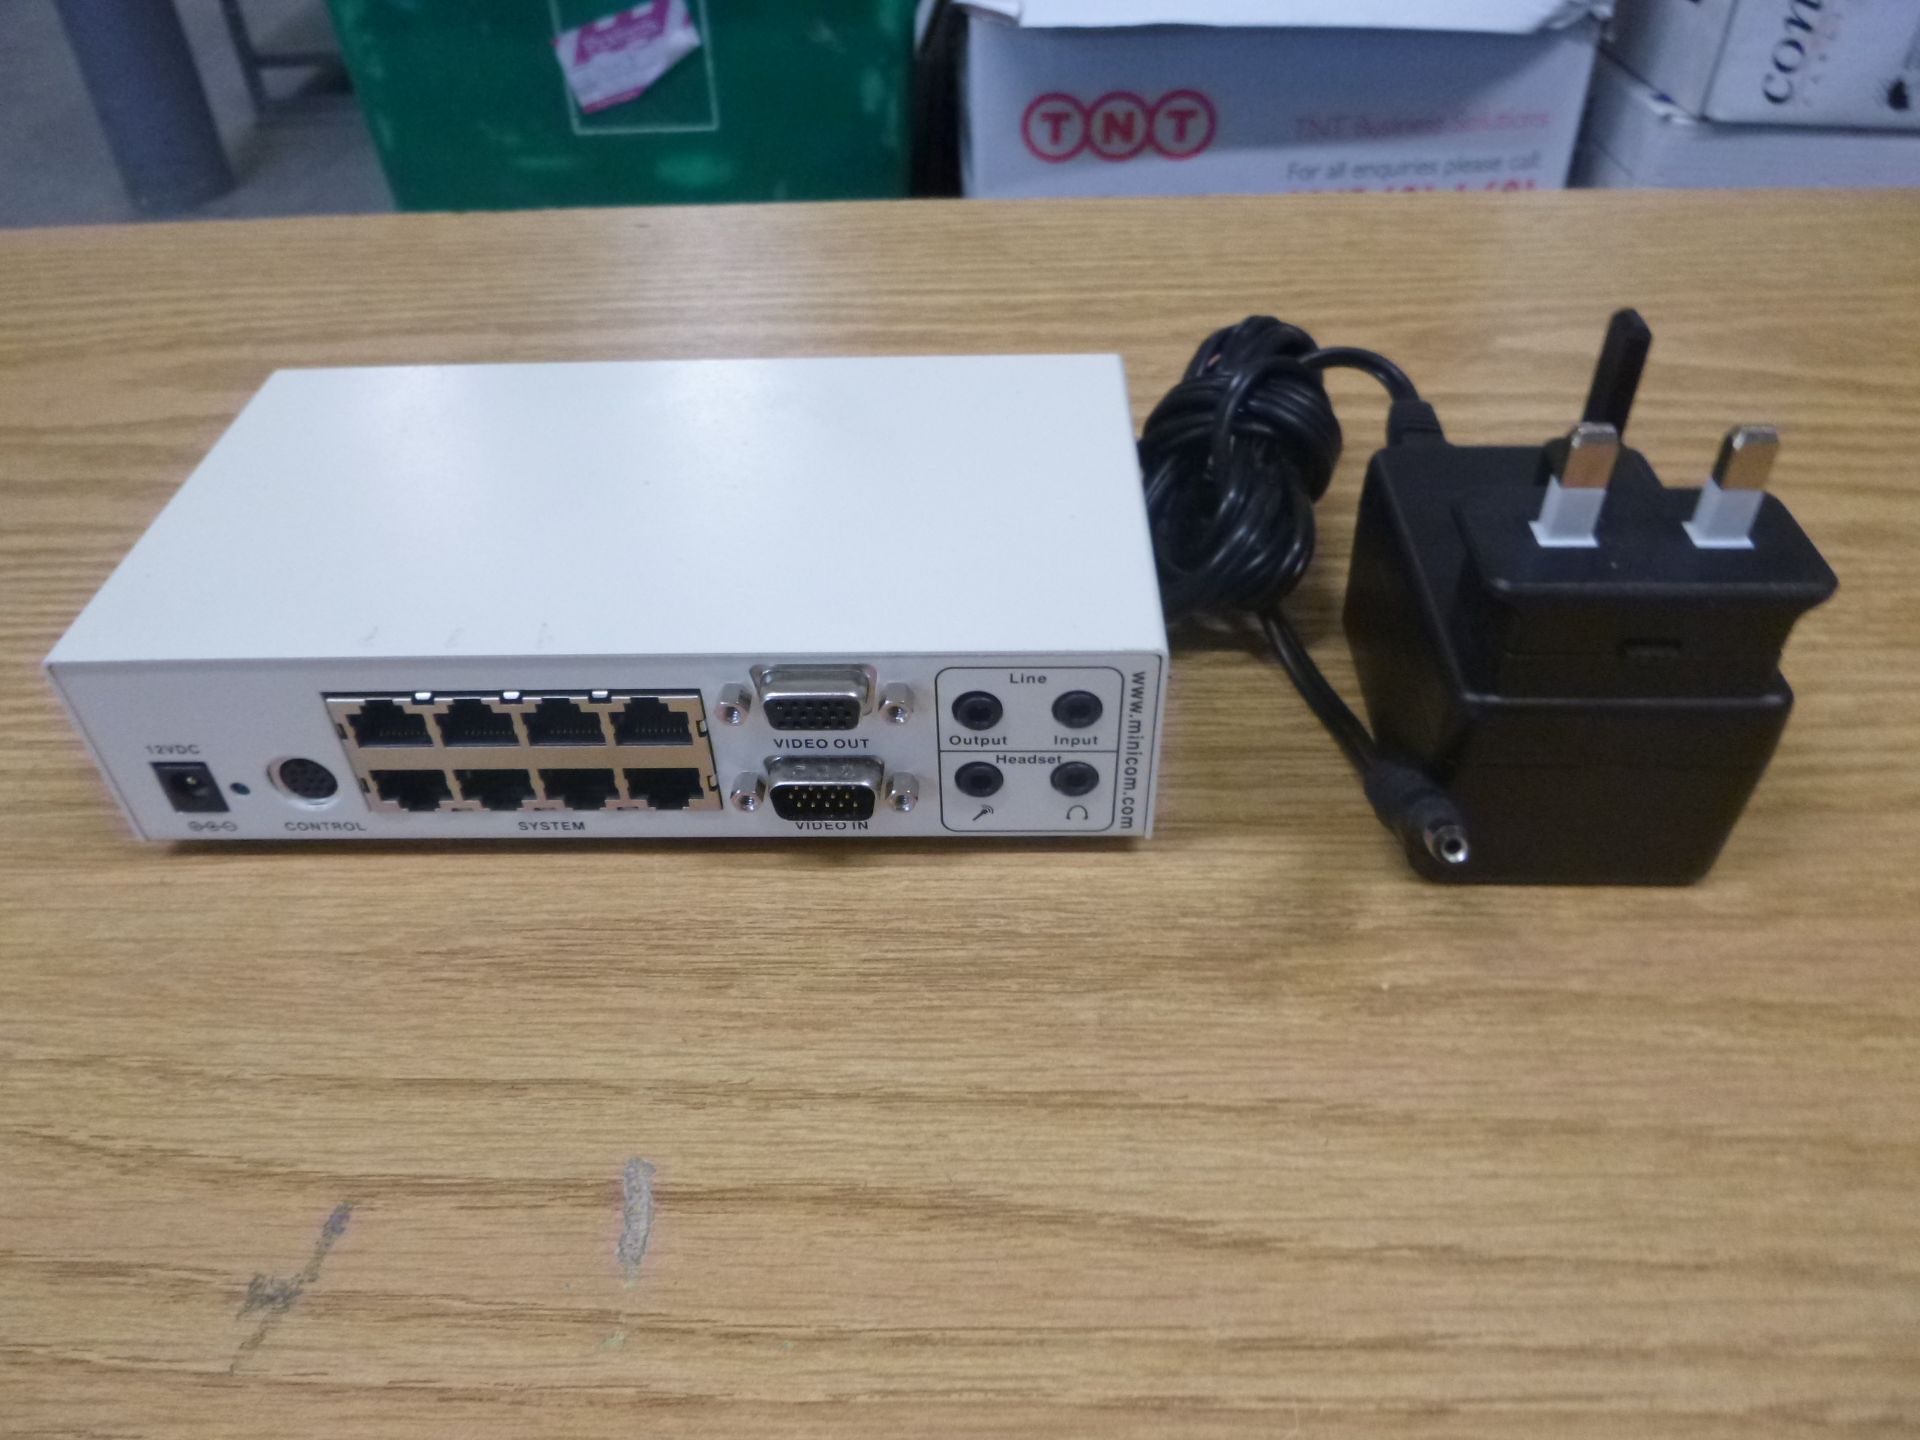 Minicom Digital Signage 8-Port Cat5 Audio Video Display Broadcaster WITH PSU. More info at: http:// - Image 2 of 2